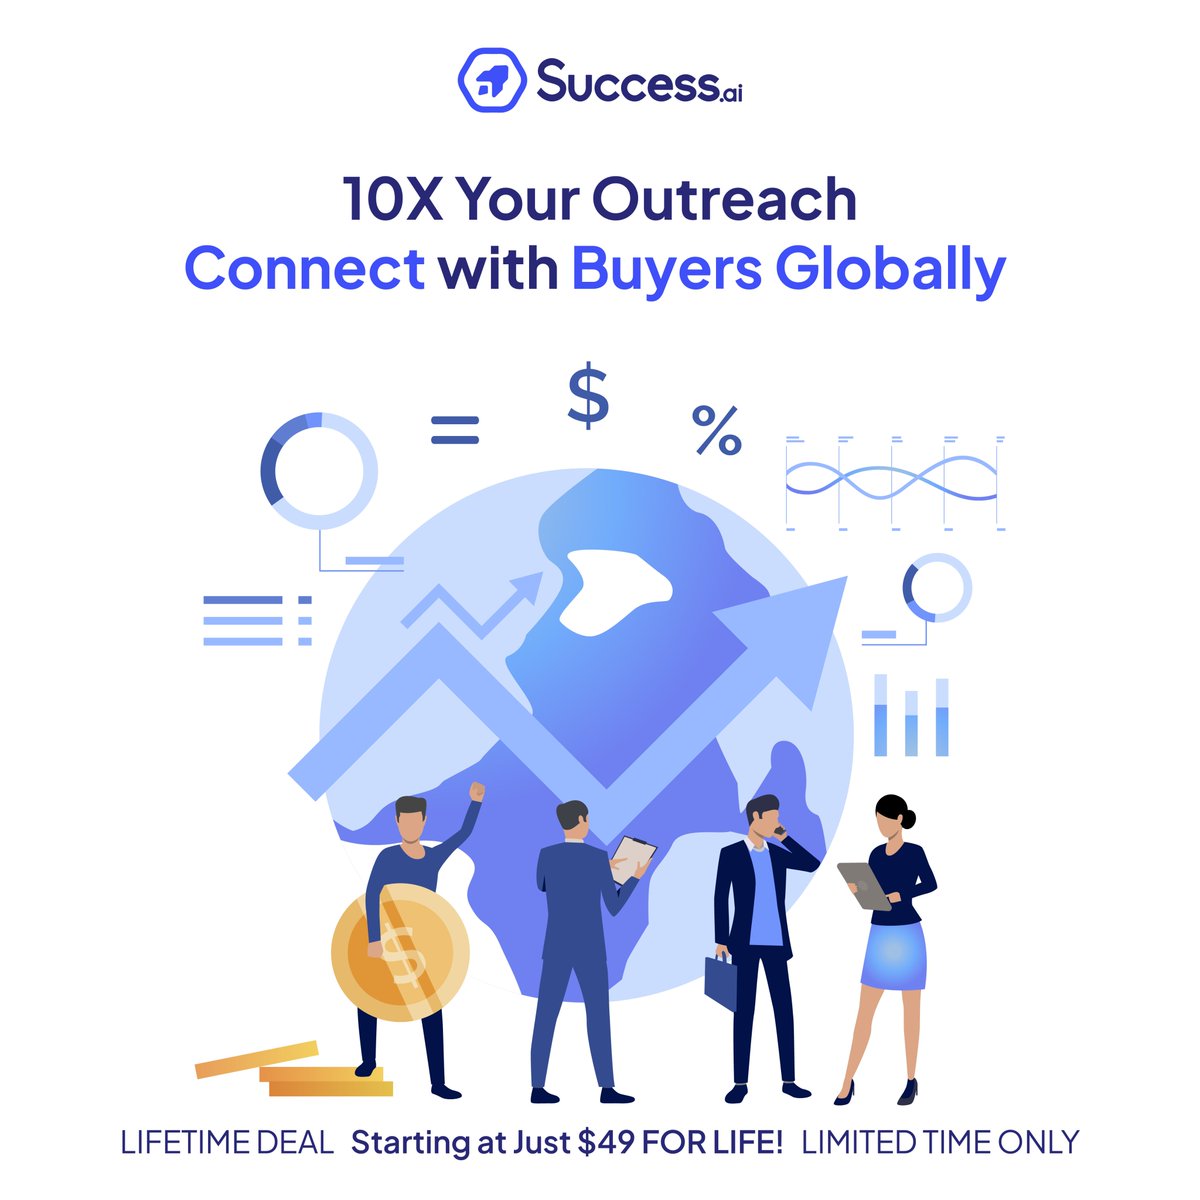 10X Your Outreach: Connect with Buyers Globally 

With Success.ai say goodbye to missed opportunities and hello to boundless connections.

#SuccessAI #BoundlessOutreach #GlobalBuyers #CostEffectiveCampaigns #PersonalizedEngagement #MarketingMastery #ReachTheWorld